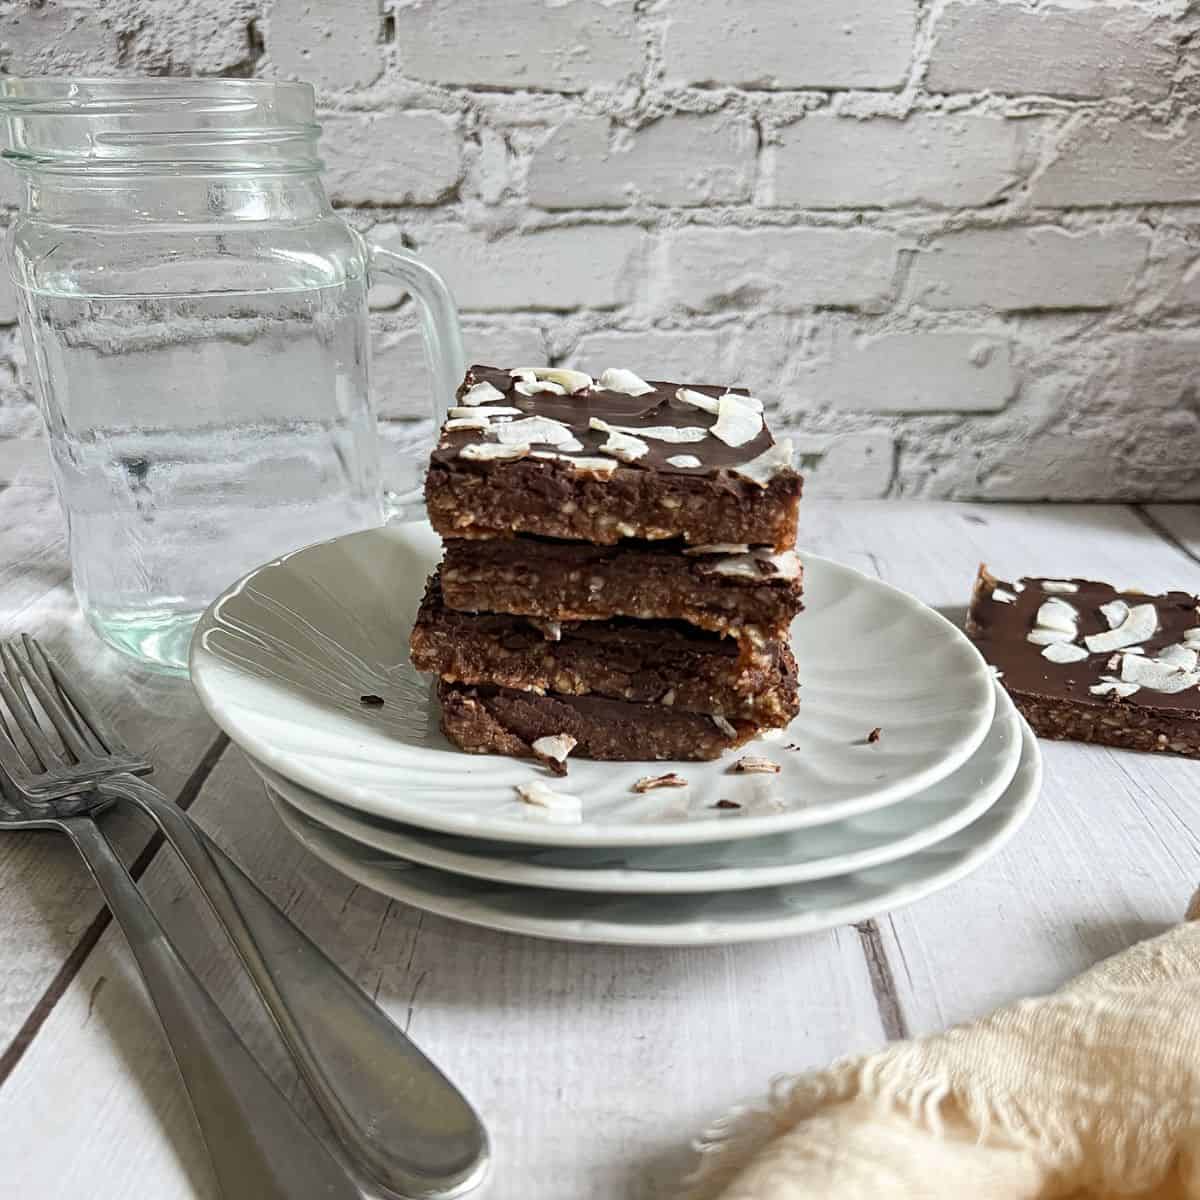 Few slices of energy bars on a plate.